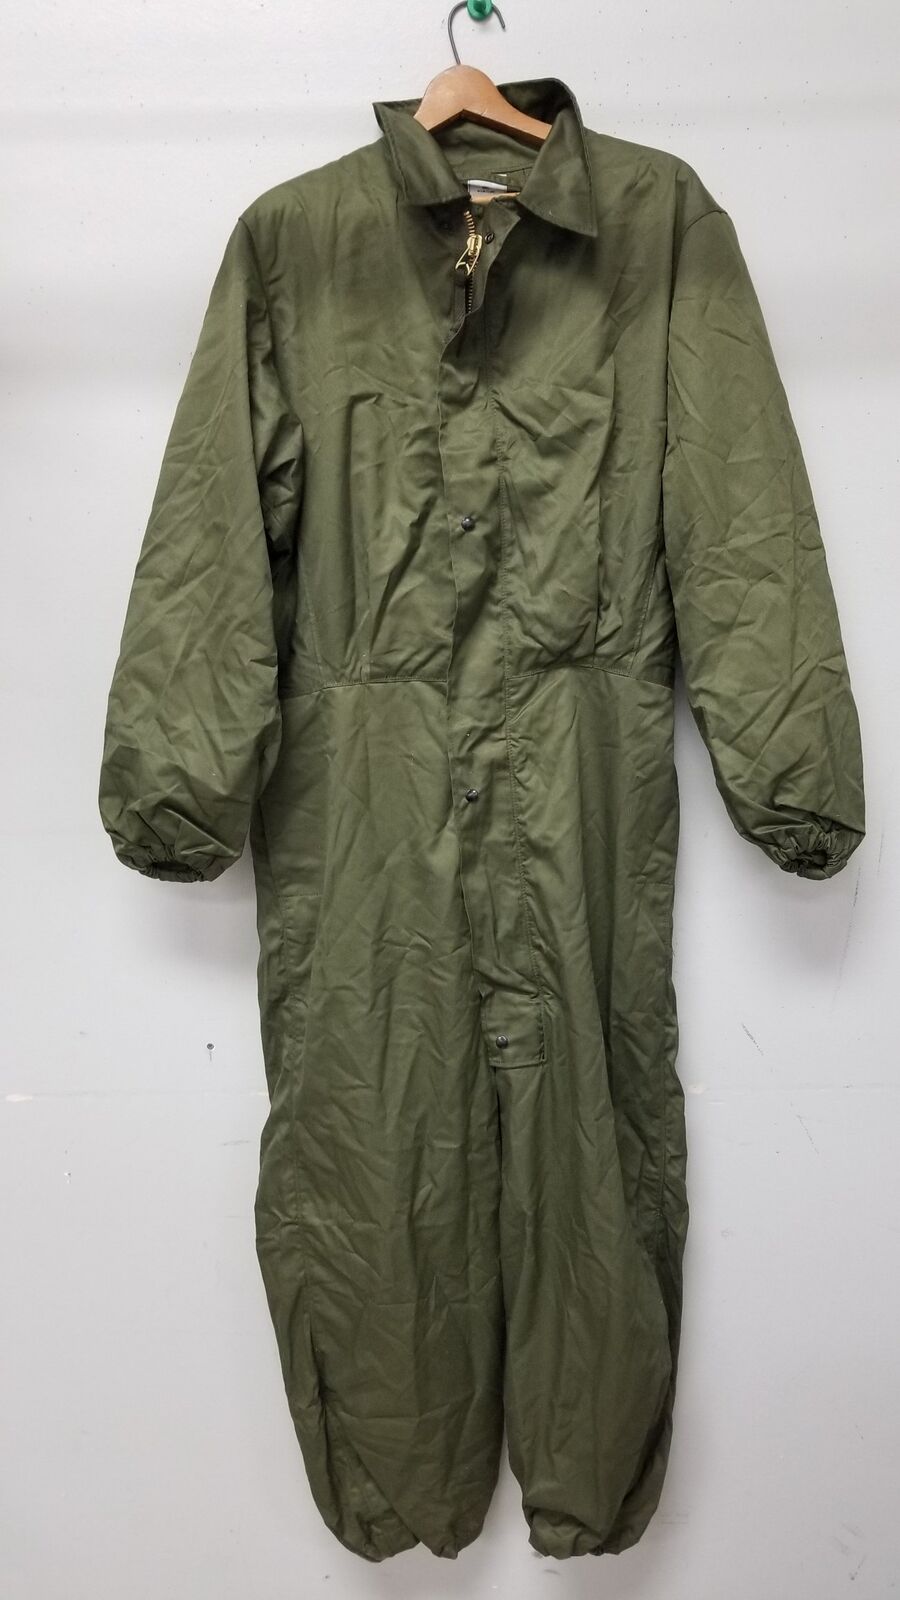 Vintage Men's U.S. Military Mechanic's Cold Weather Coveralls - Size Small